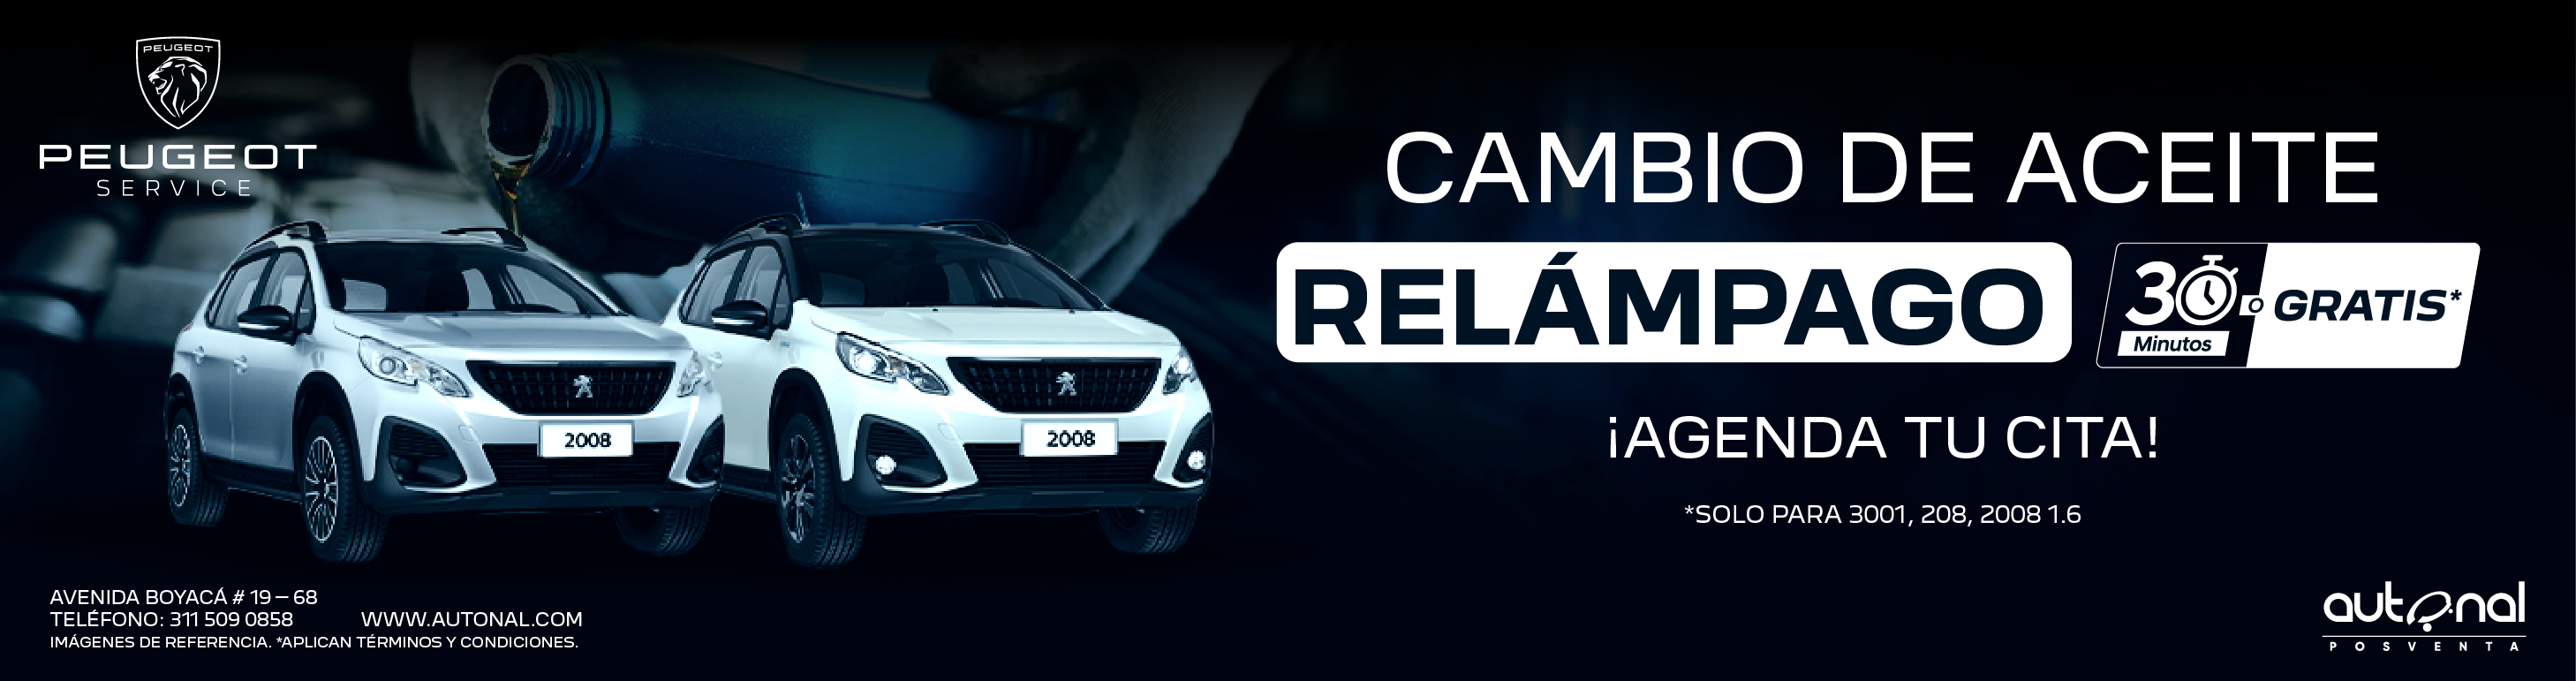 Cambio Aceite Peugeot Banner